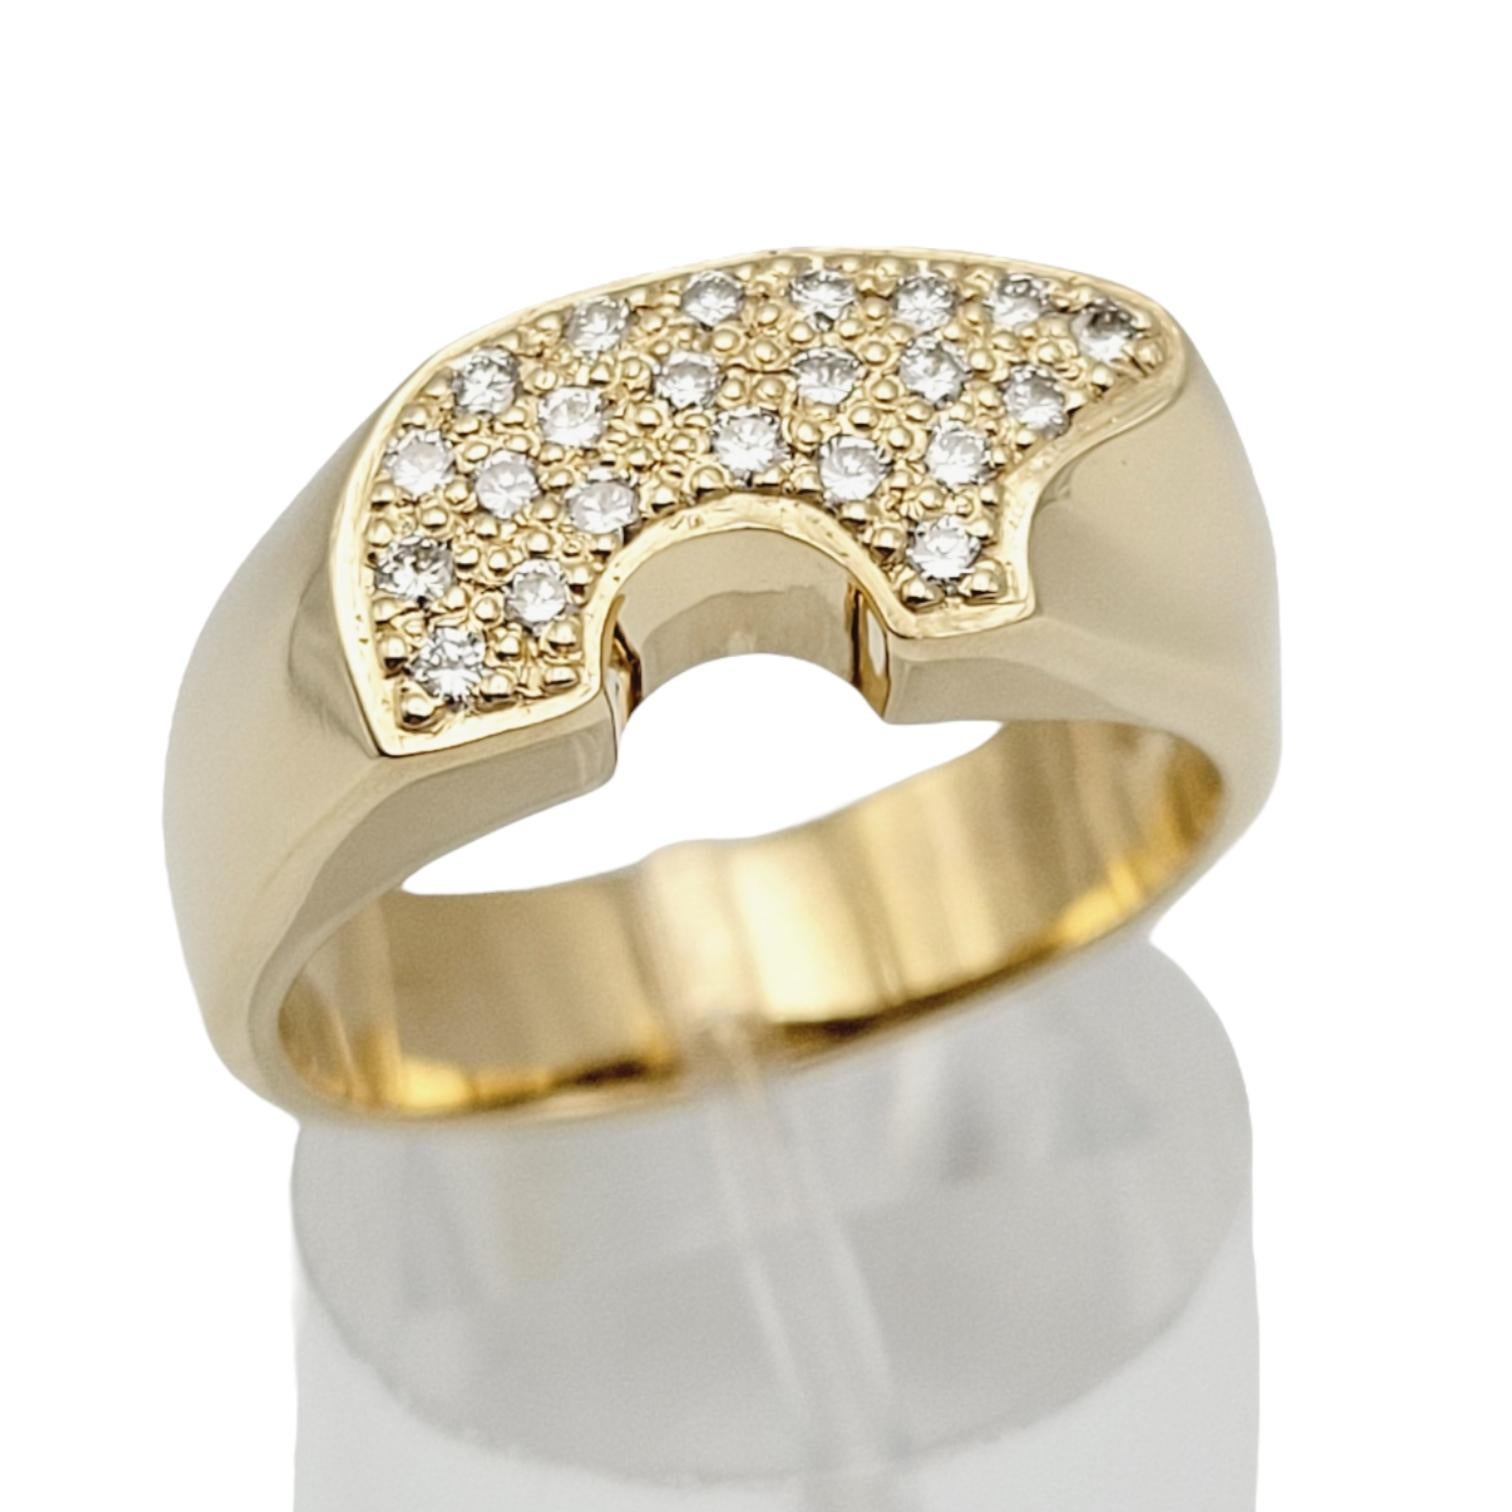 Golden Bear Pave Diamond Bear Signet Band Ring in 14 Karat Yellow Gold 7.5 In Good Condition For Sale In Scottsdale, AZ